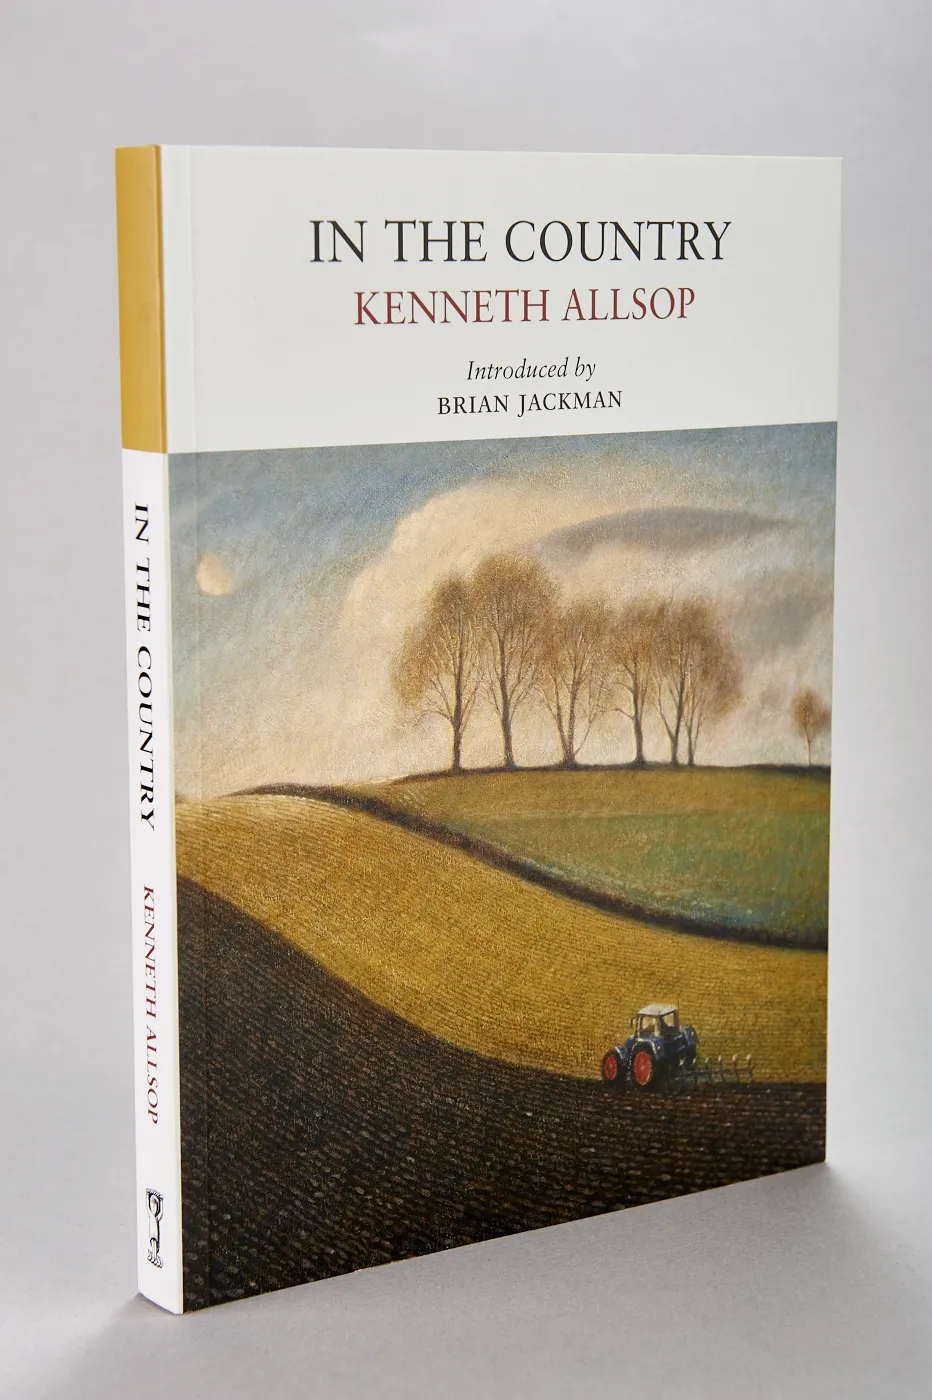 In the Country by Kenneth Allsop